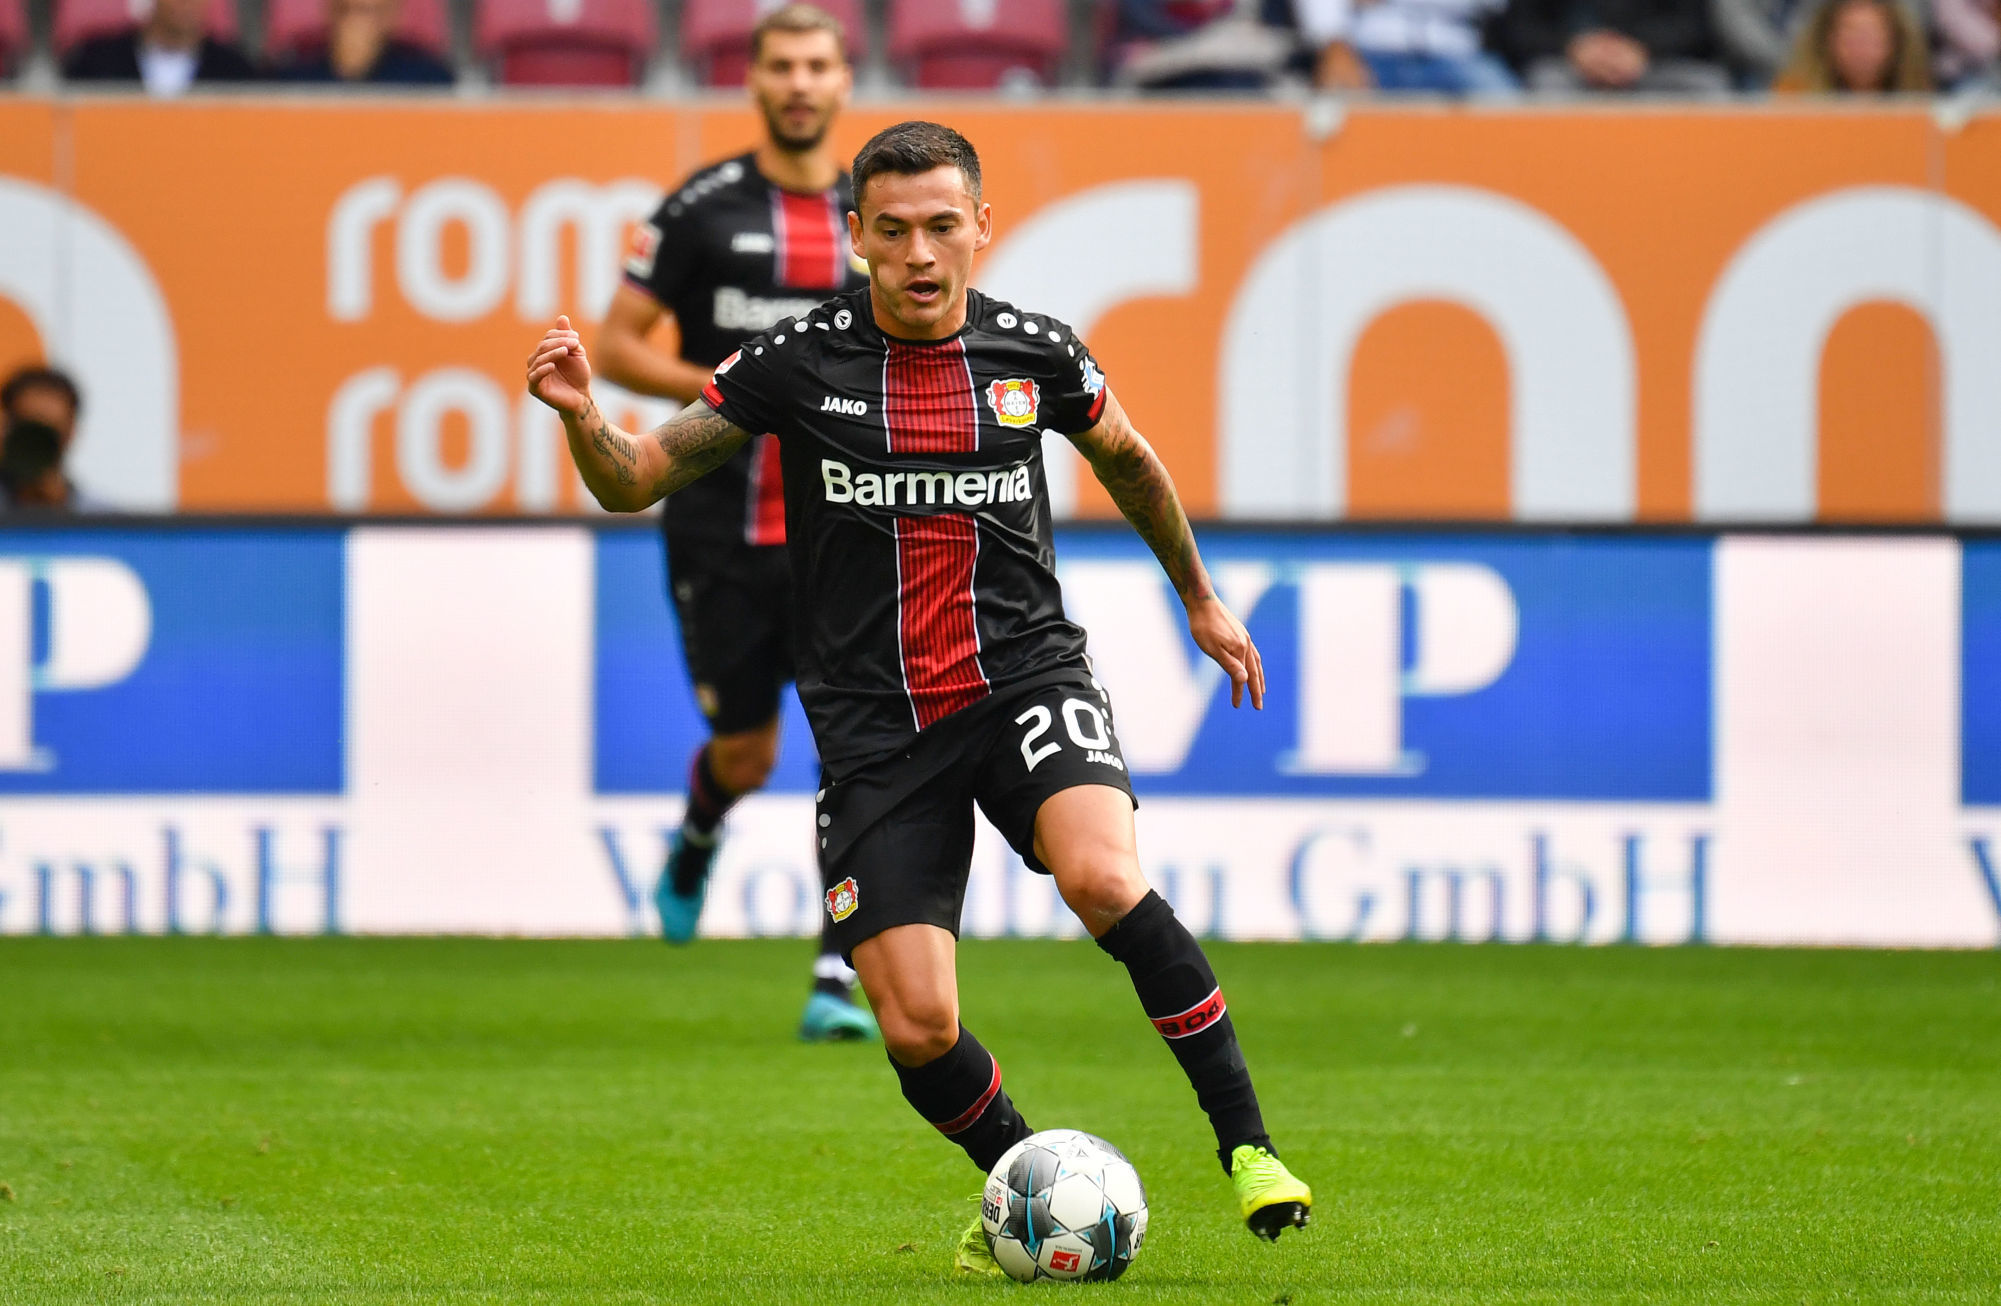 Charles ARANGUIZ (Bayer Leverkusen), Action, Single Action, Frame, Cut Out, Full Body, Whole Figure. Soccer 1. Bundesliga, 6.matchday, matchday06, FC Augsburg (A) -Bayer Leverkusen (LEV) 0-3, on 28.09.2019 in Augsburg, WWKARENA, DFL REGULATIONS PROHIBIT ANY USE OF PHOTOGRAPH AS IMAGE SEQUENCES AND / OR QUASI VIDEO. | usage worldwide ..Photo by Icon Sport - Charles ARANGUIZ - WWK Arena - Augsbourg (Allemagne)